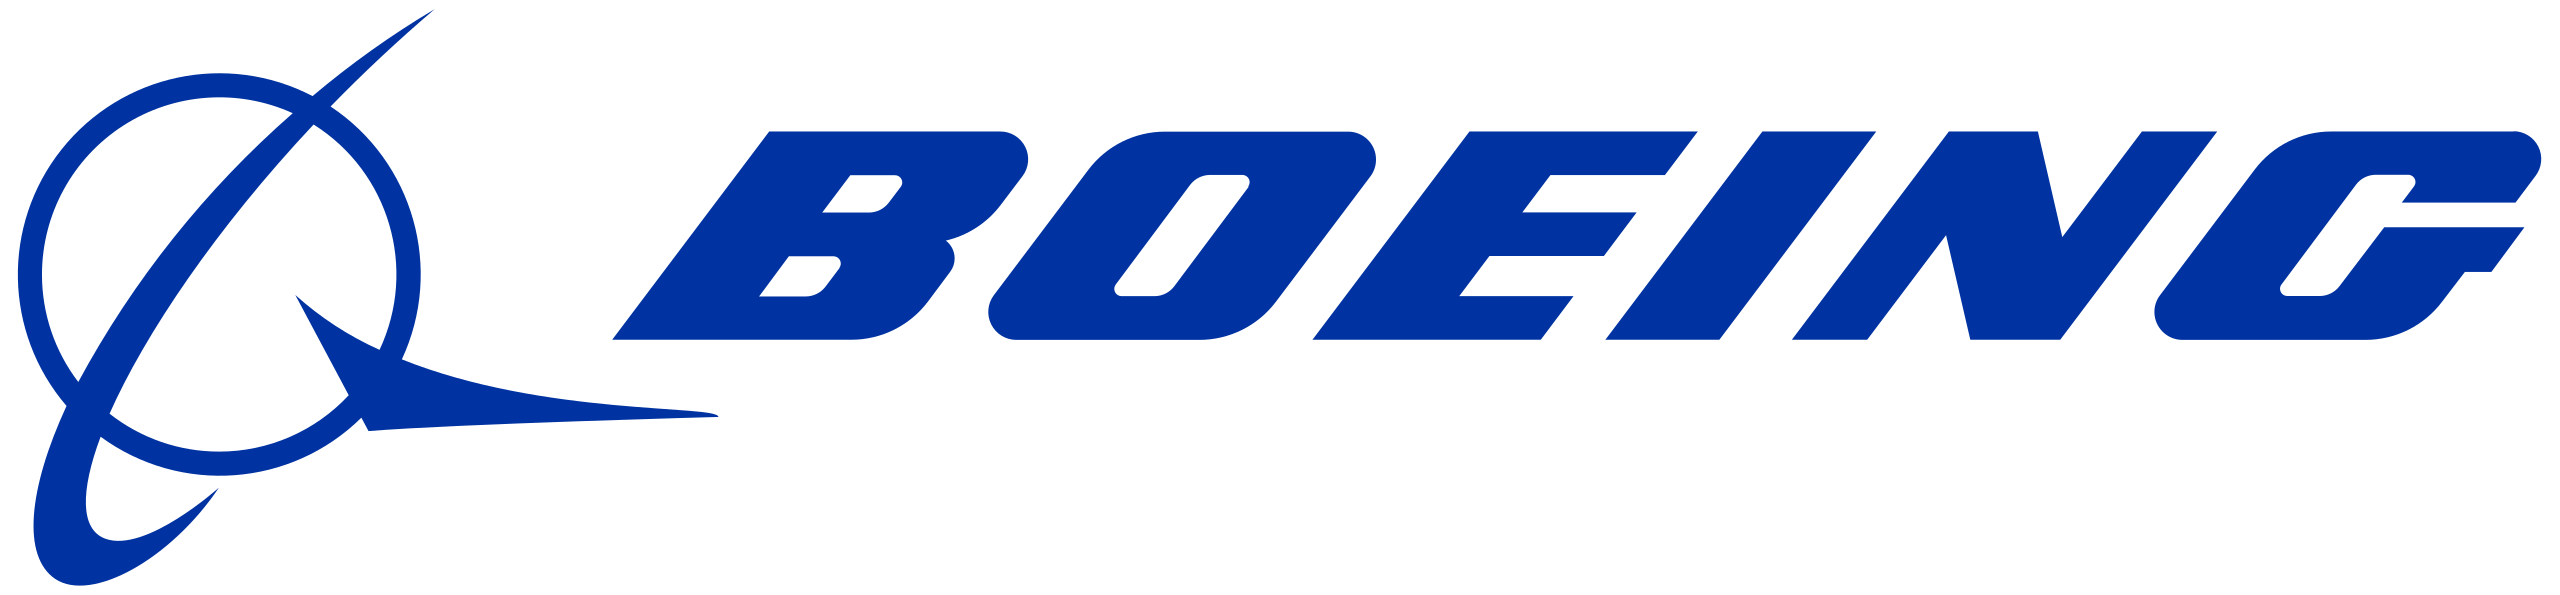 Apache System Safety Engineer (Boeing)